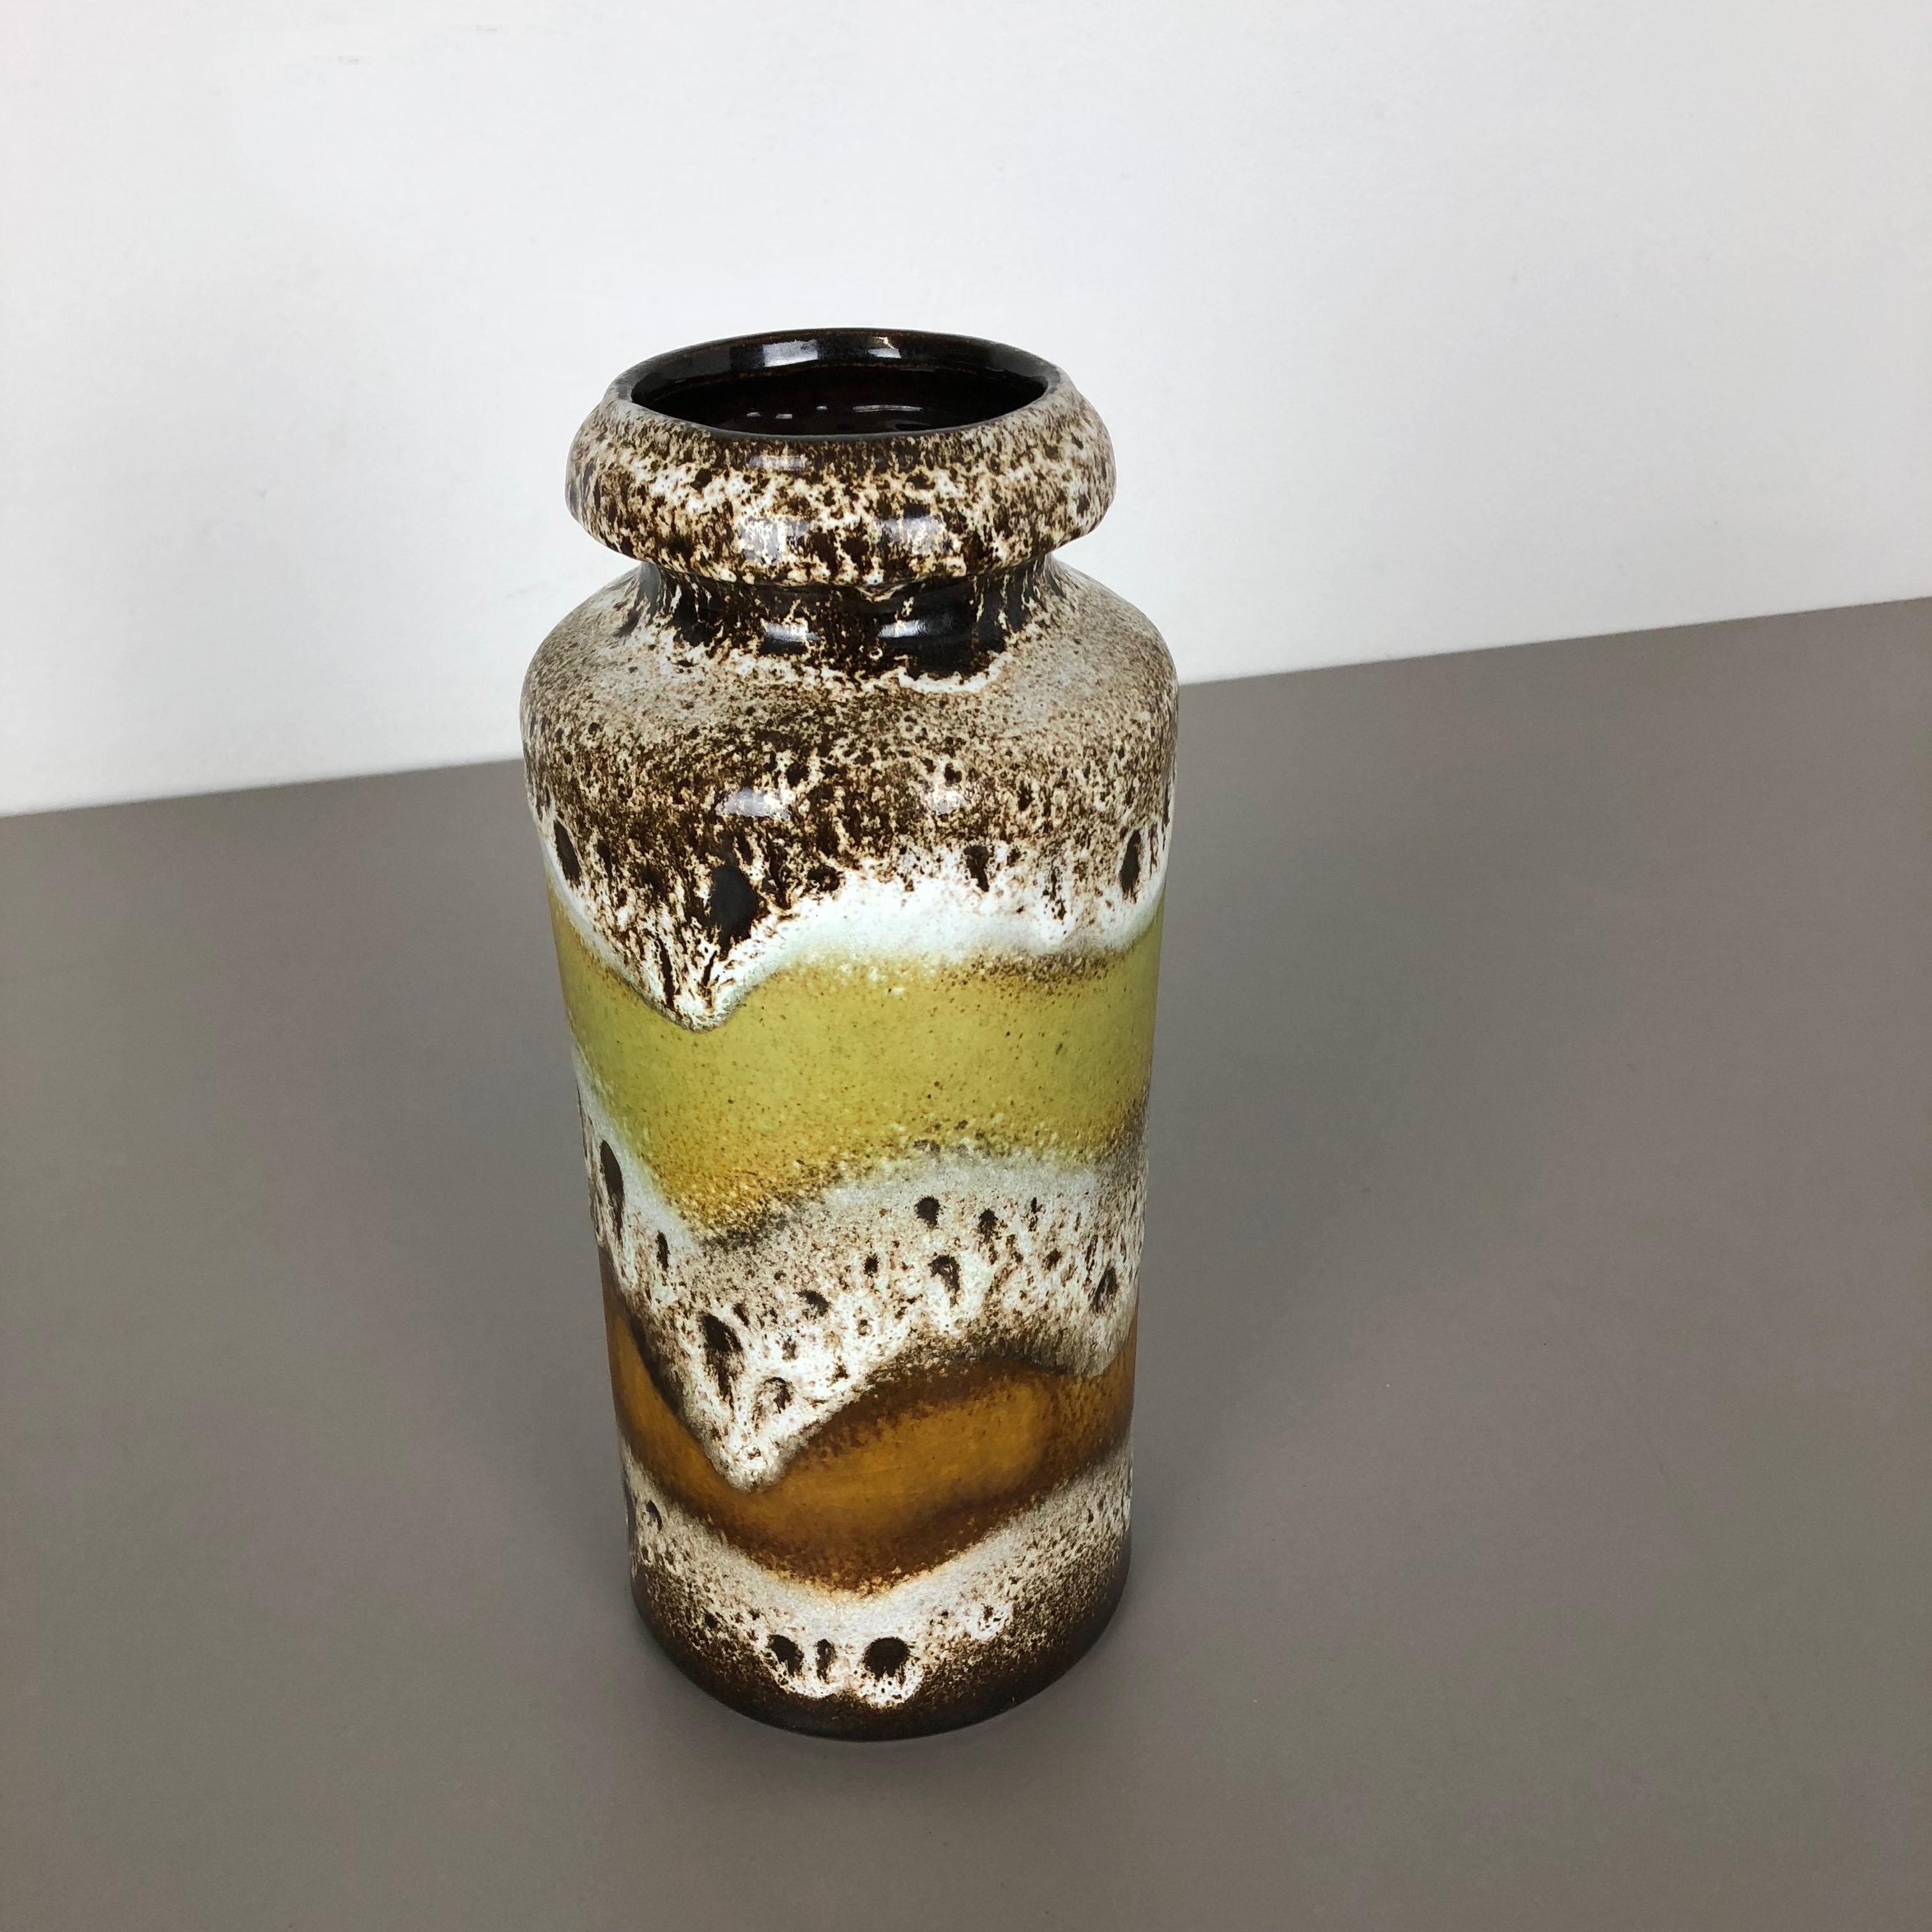 Article:

Pottery ceramic vase

Fat lava


Producer:

Scheurich, Germany


Decade:

1970s


Origin:

Germany



Original vintage 1970s pottery ceramic vase in Germany. High quality German production with a nice abstract